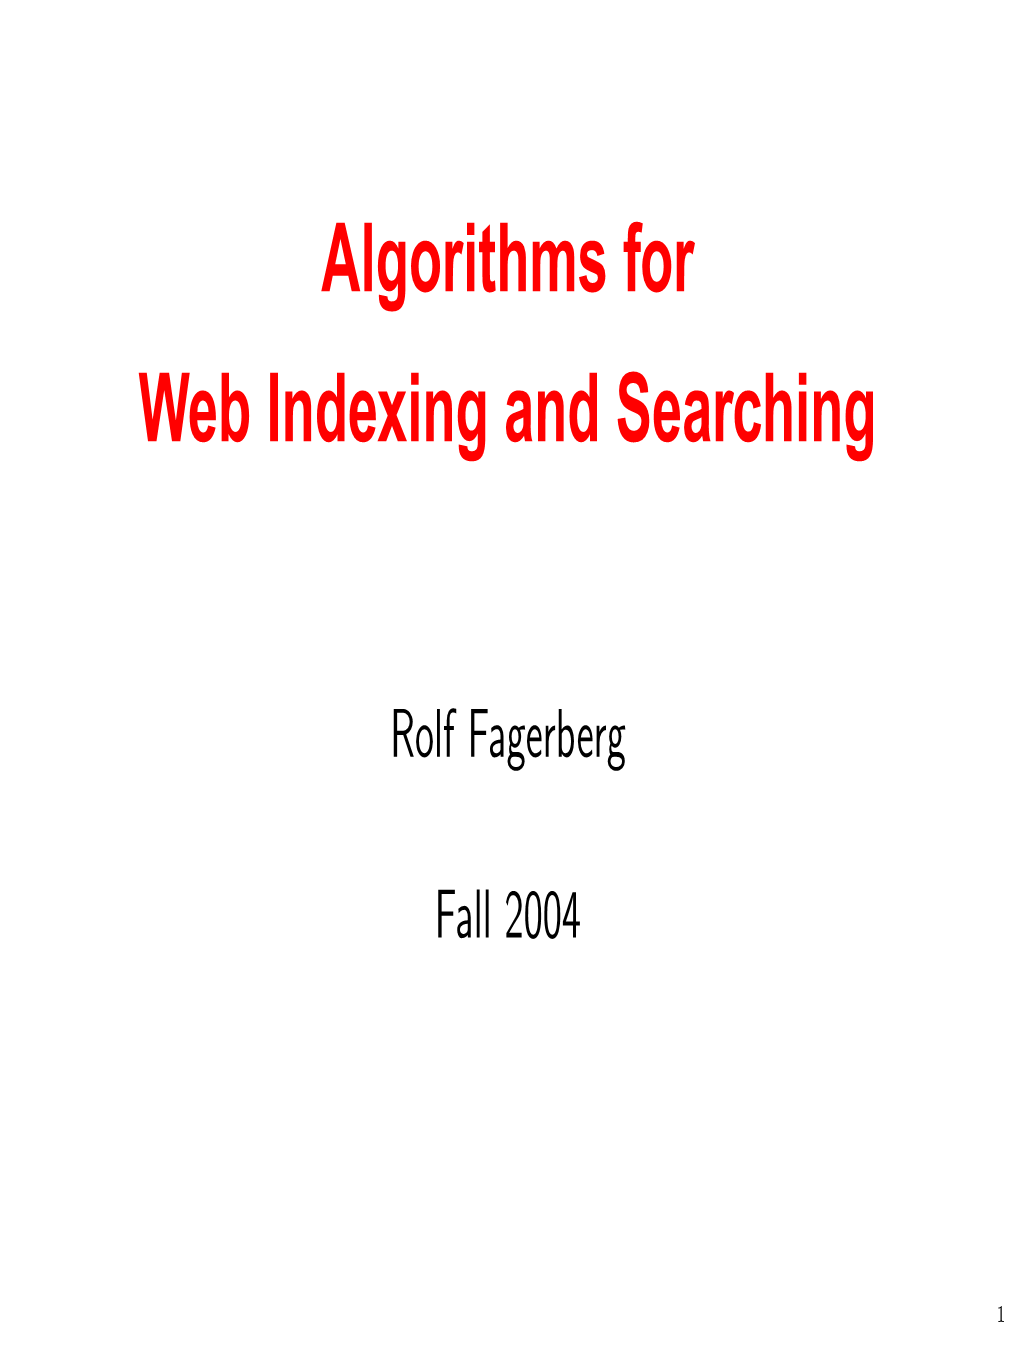 Algorithms for Web Indexing and Searching